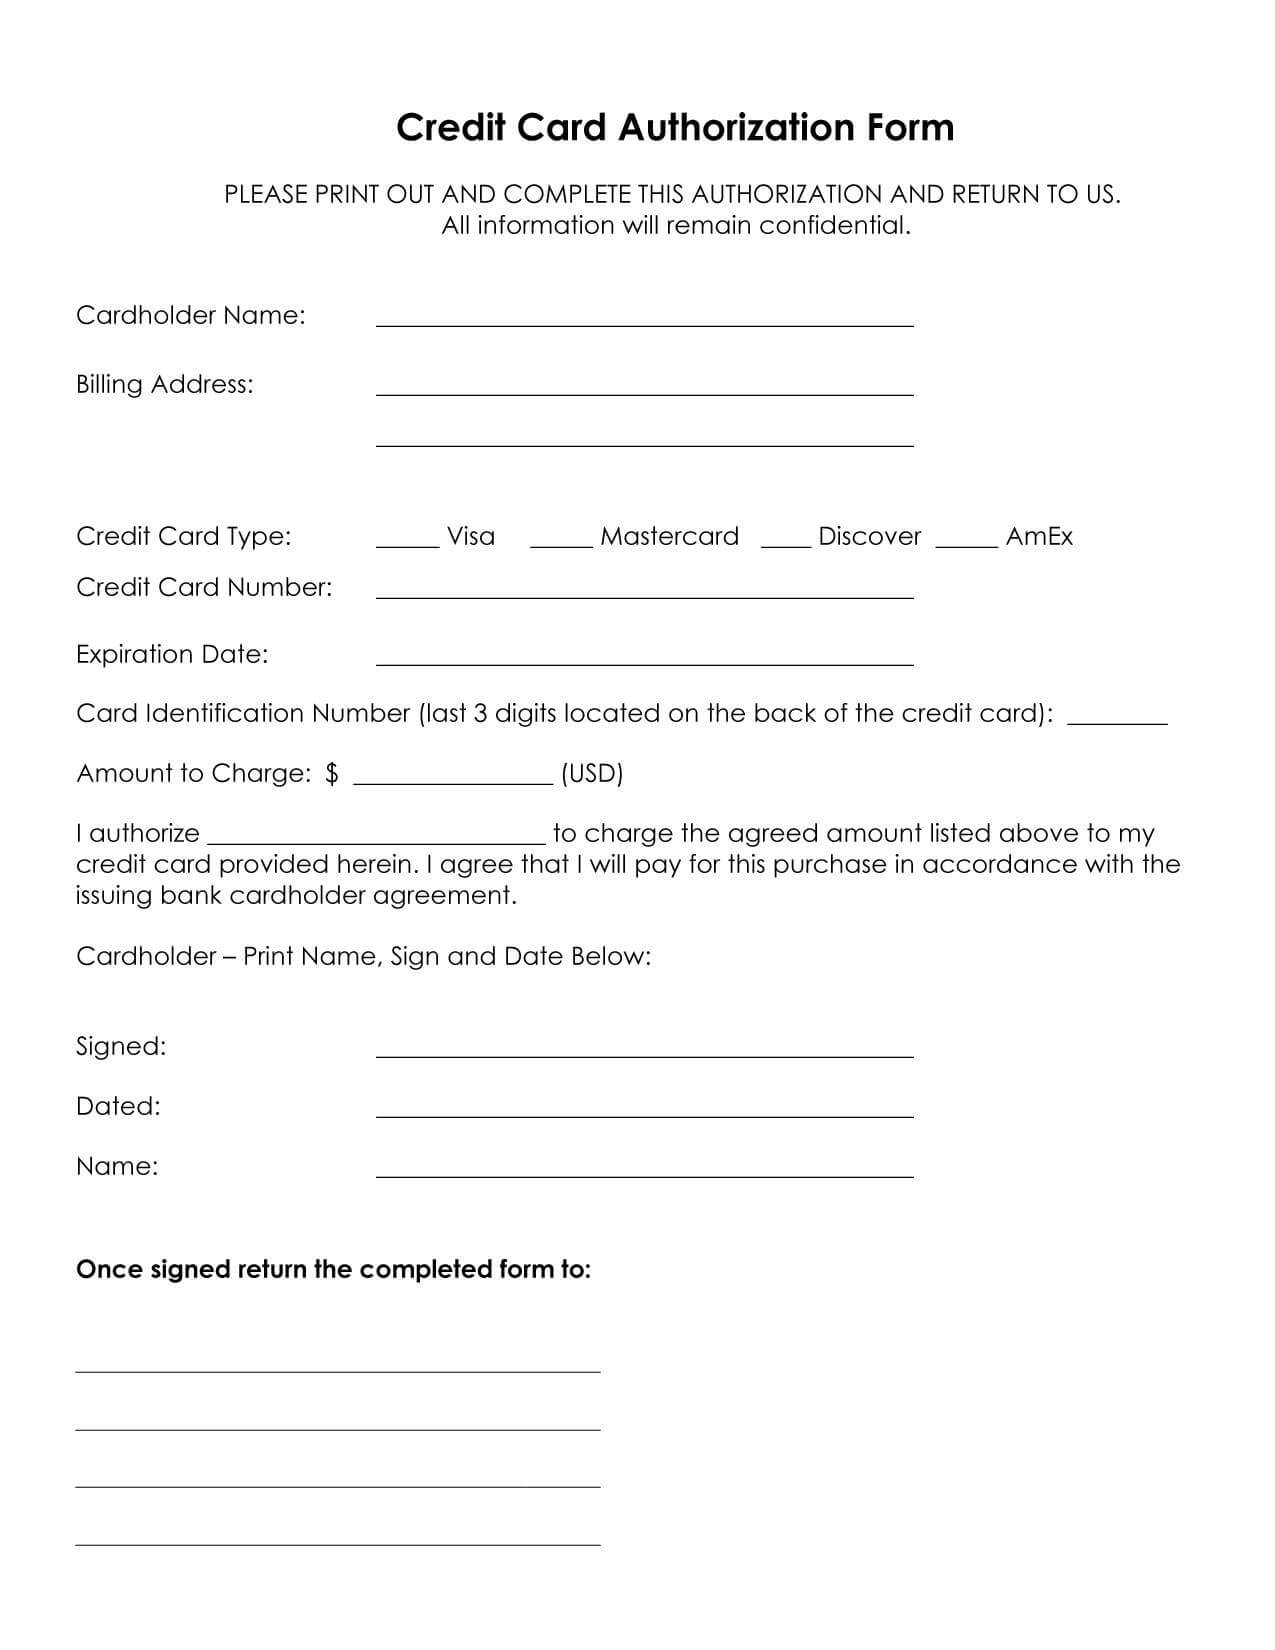 Credit Card Authorization Form Template Microsoft - Calep Pertaining To Credit Card Billing Authorization Form Template